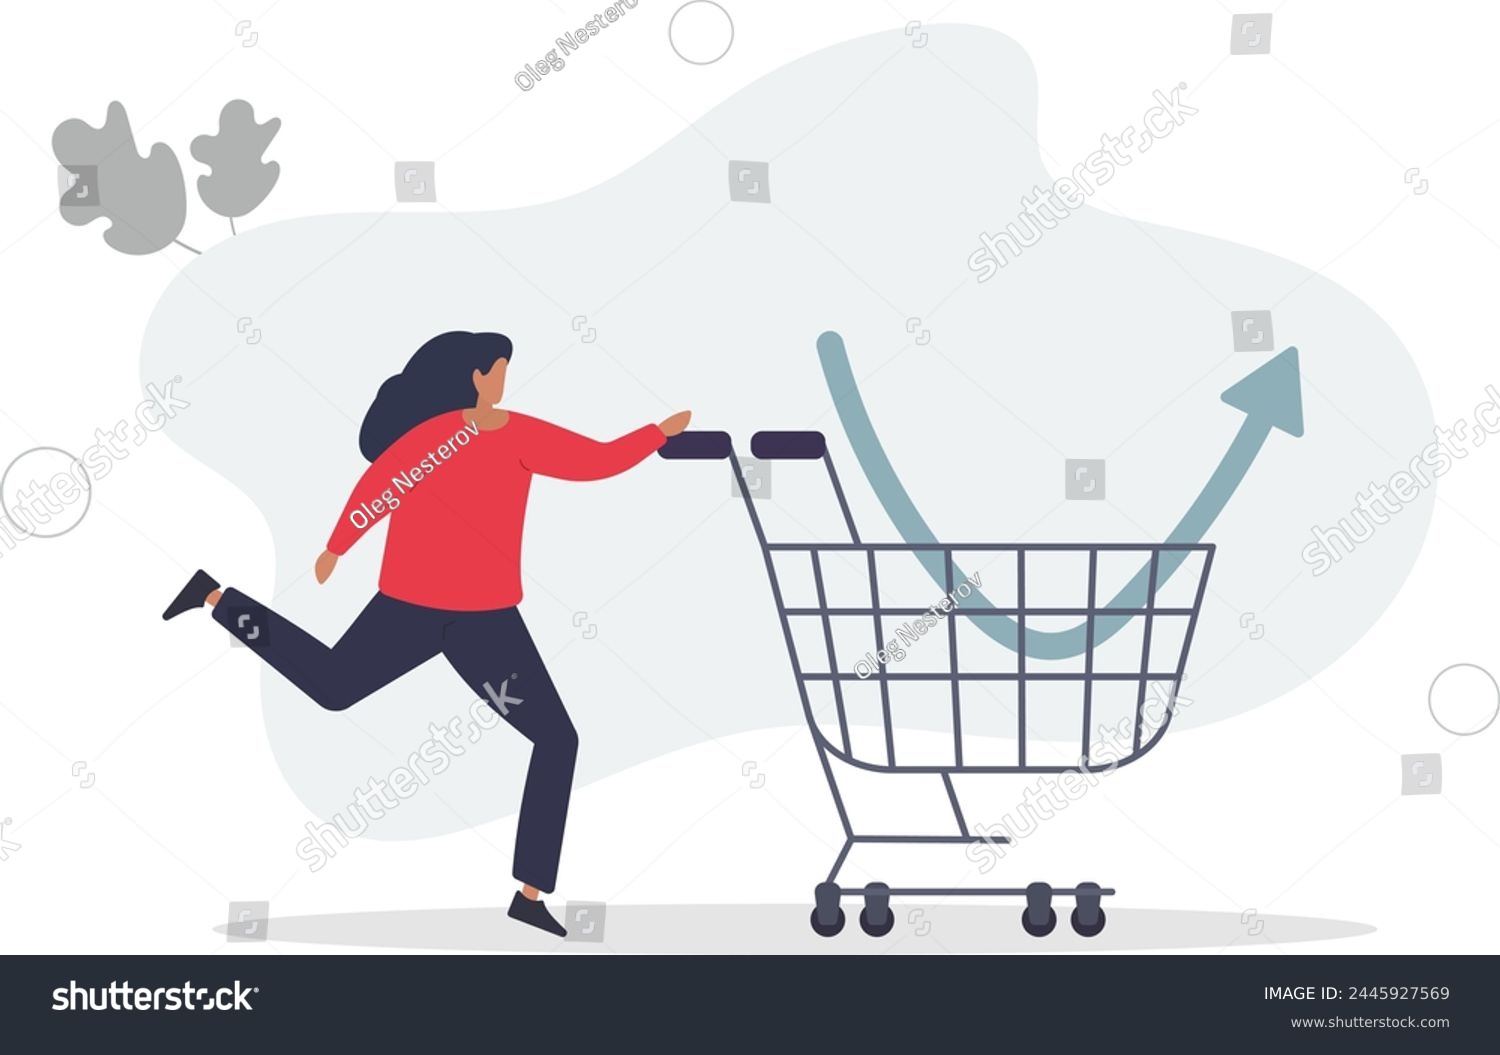 SVG of Buy on the dip, purchase stock when price drop, trader signal to invest, make profit from market collapse concept.flat vector illustration. svg